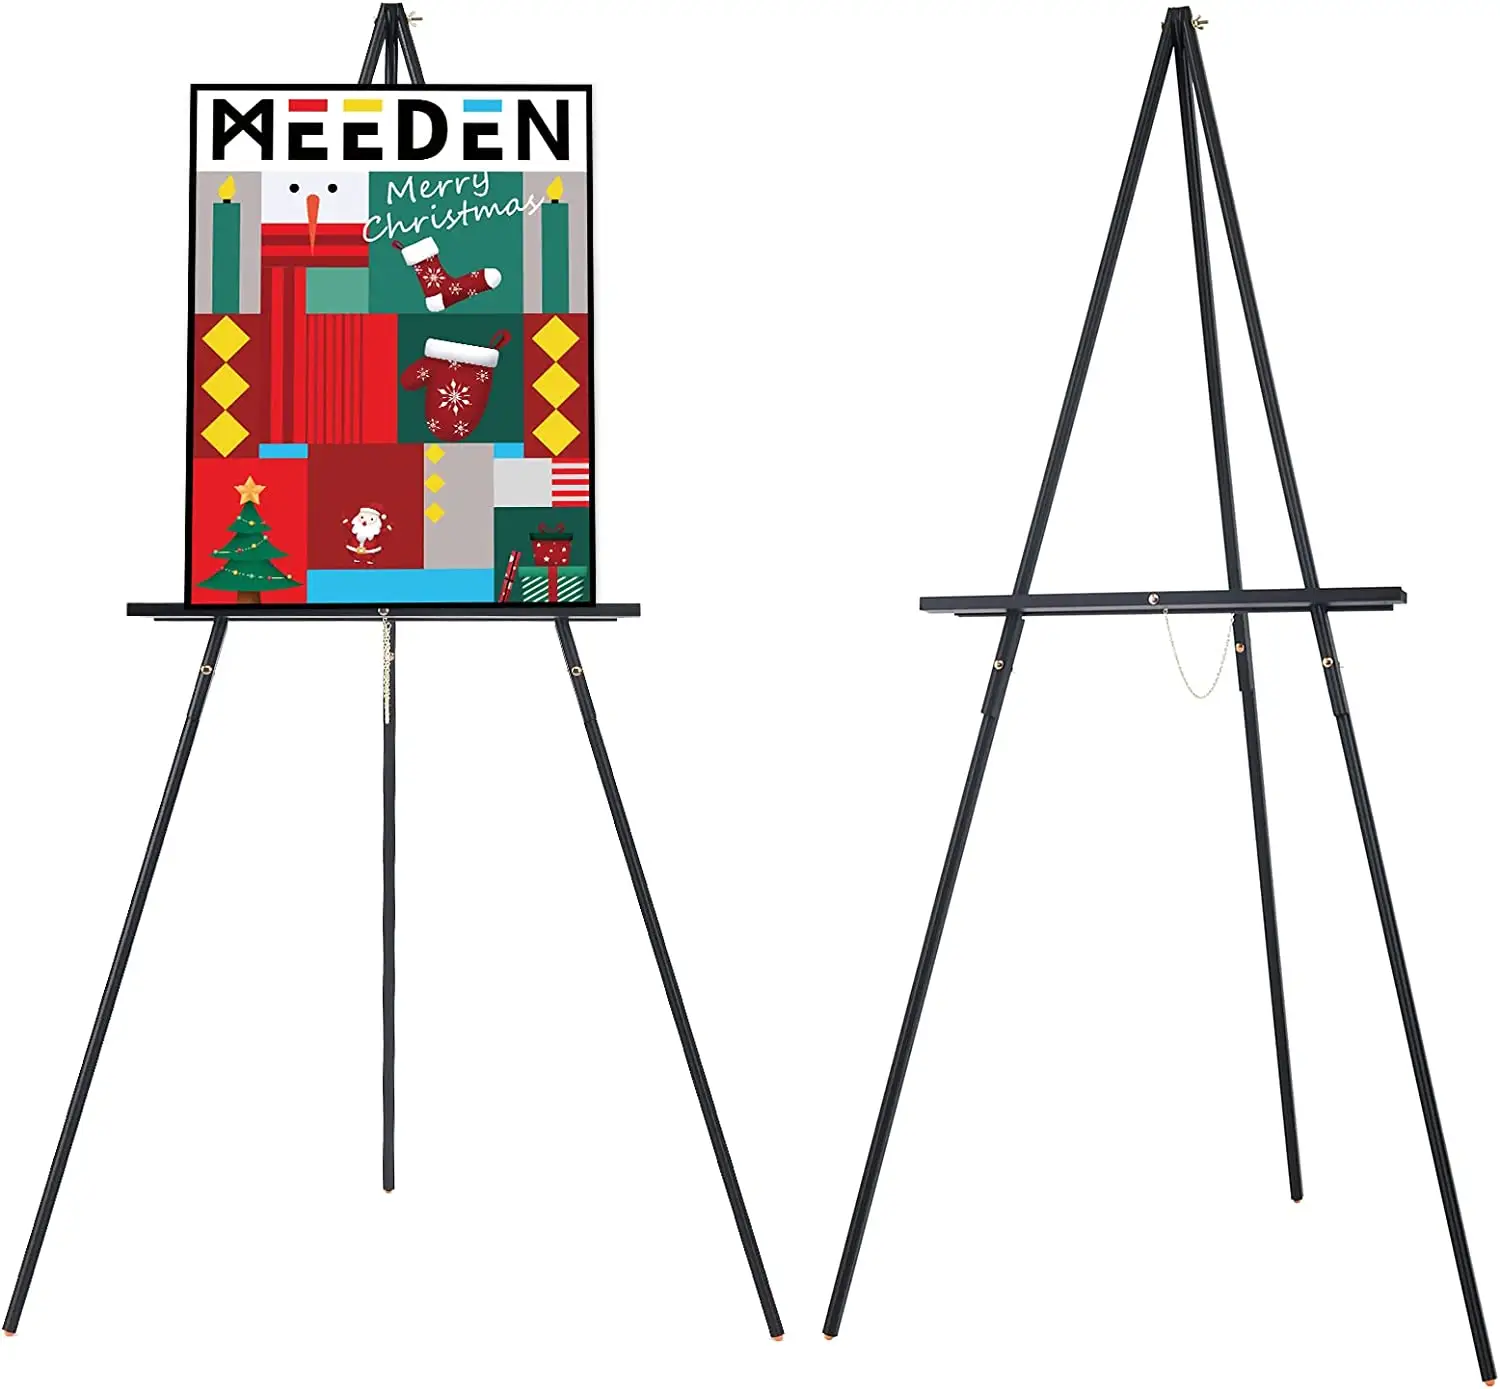 MEEDEN Wedding Easel Stand Max height 64'' Holds Up to 40" Wooden Stand for Sign Wood Display Easel Floor Tripod Sign Holder